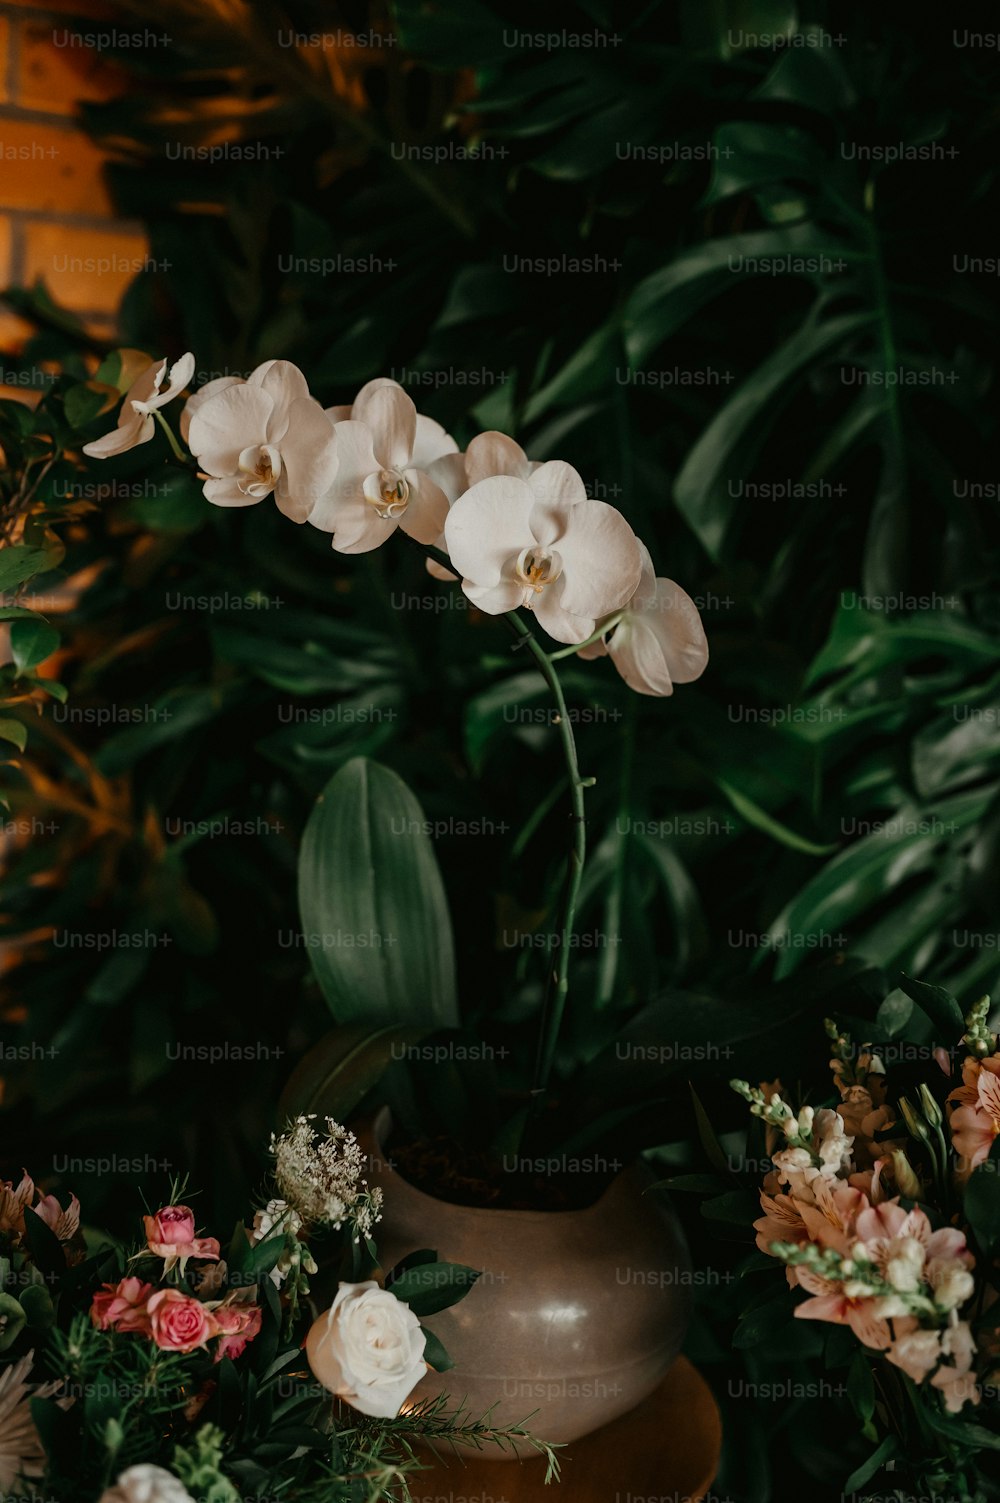 a vase filled with white flowers next to a wall of greenery